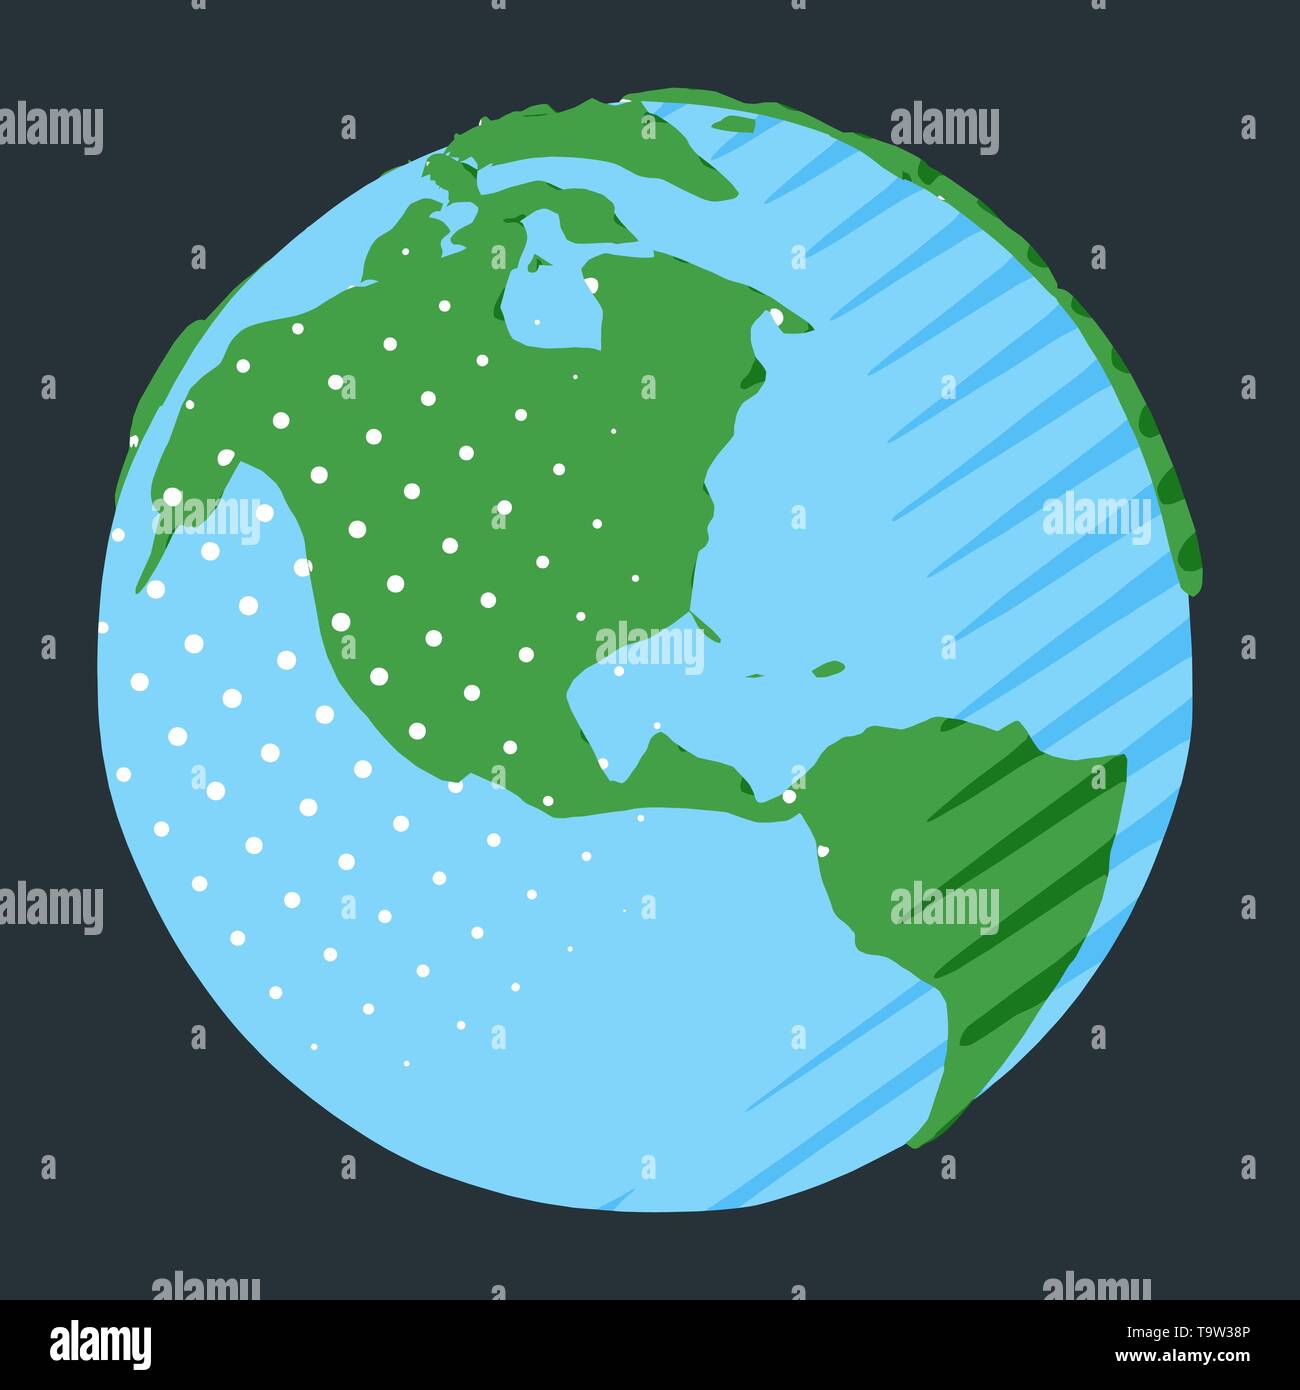 Western hemisphere on globe with USA placing on planet Earth in comic style Stock Vector